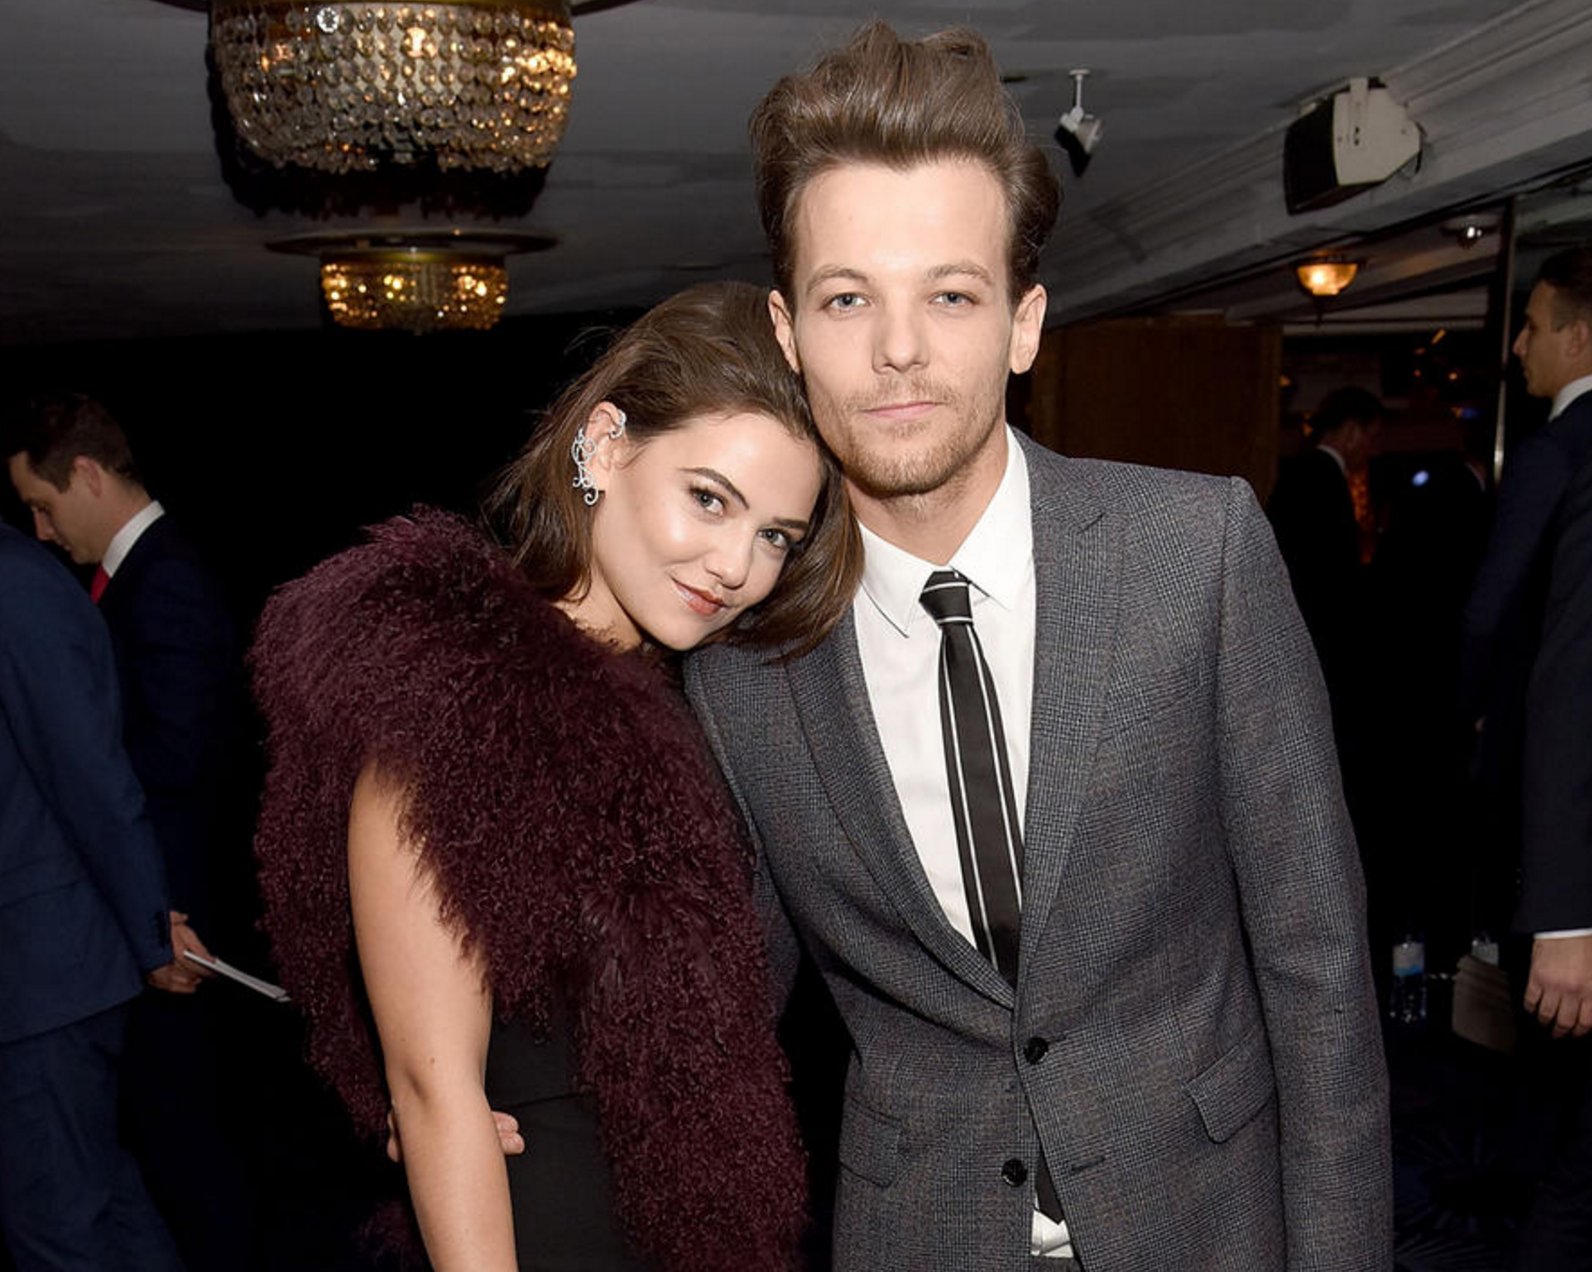 Danielle Campbell dated her then-boyfriend, Louis Tomlinson, for a year.